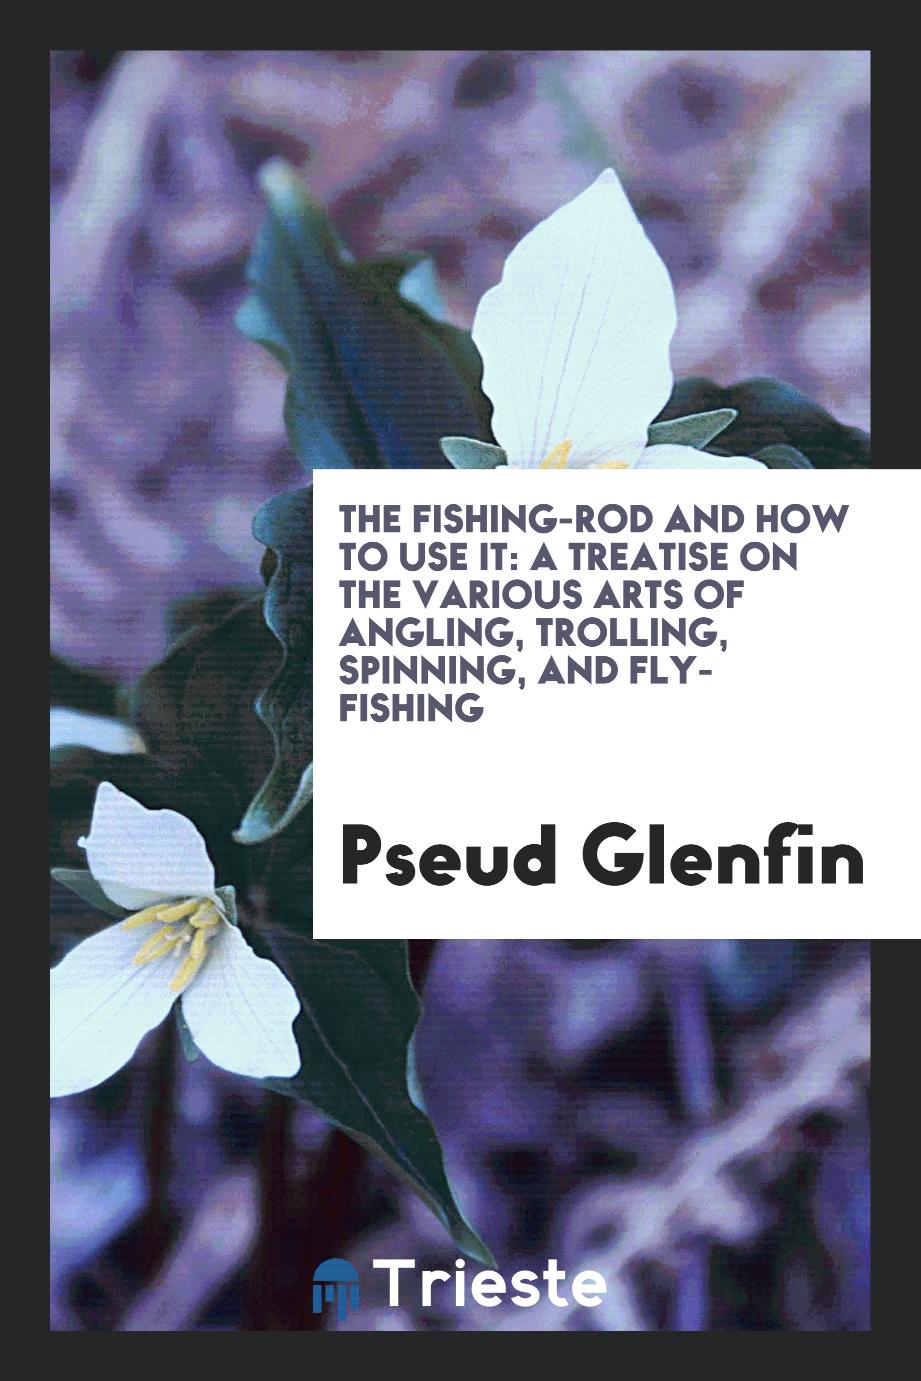 The Fishing-Rod and how to Use it: A Treatise on the Various Arts of Angling, Trolling, Spinning, and Fly-Fishing